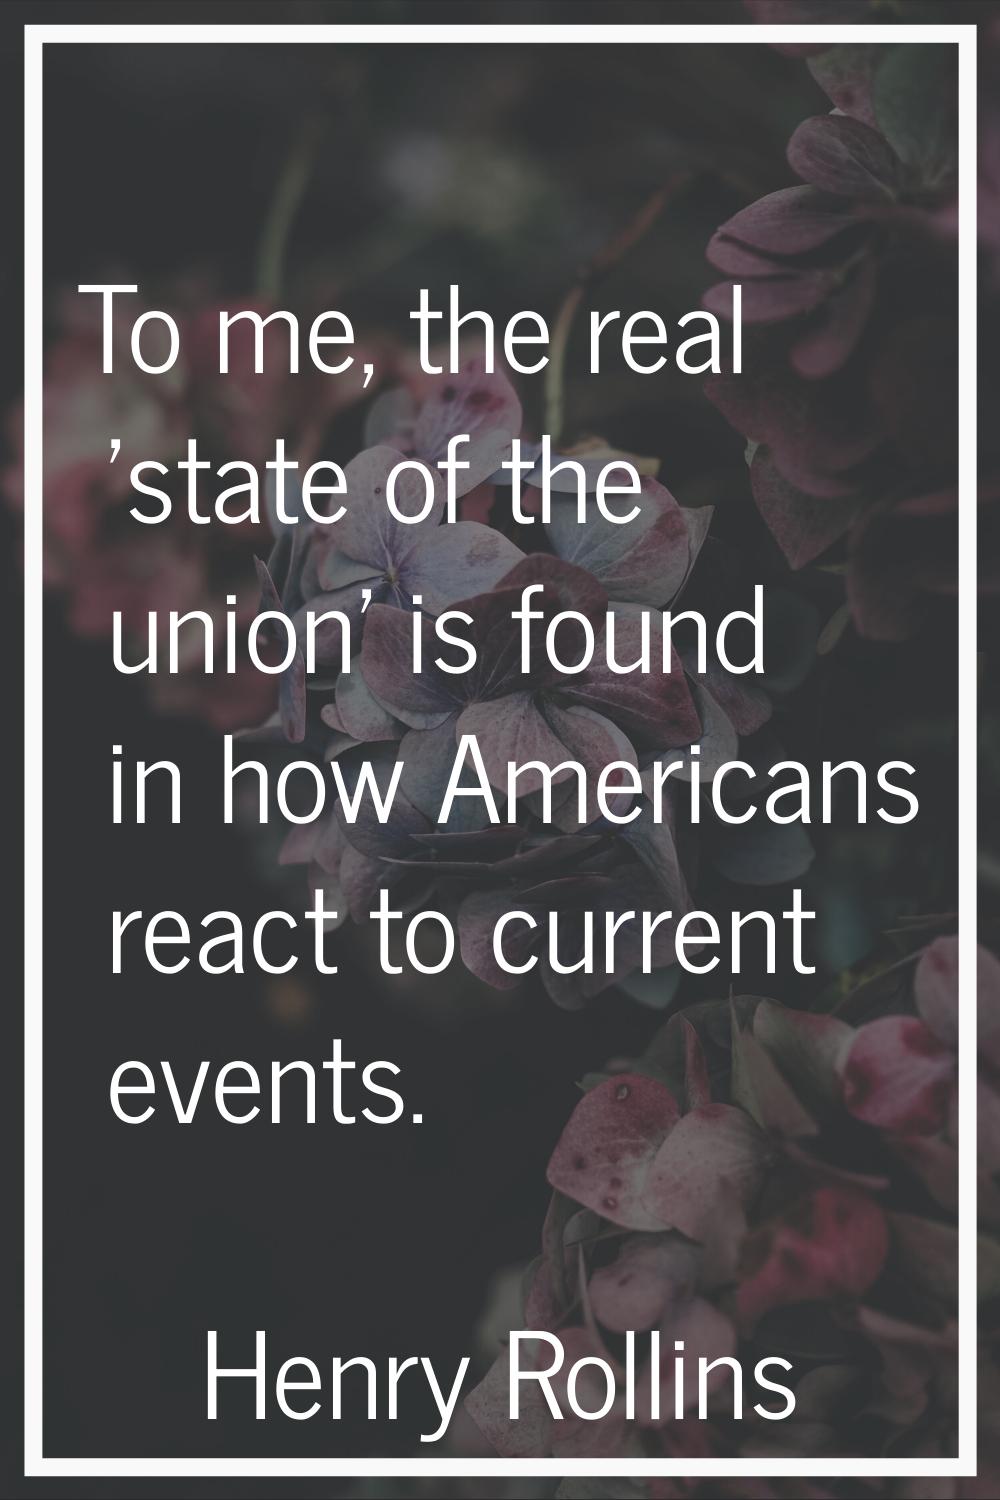 To me, the real 'state of the union' is found in how Americans react to current events.